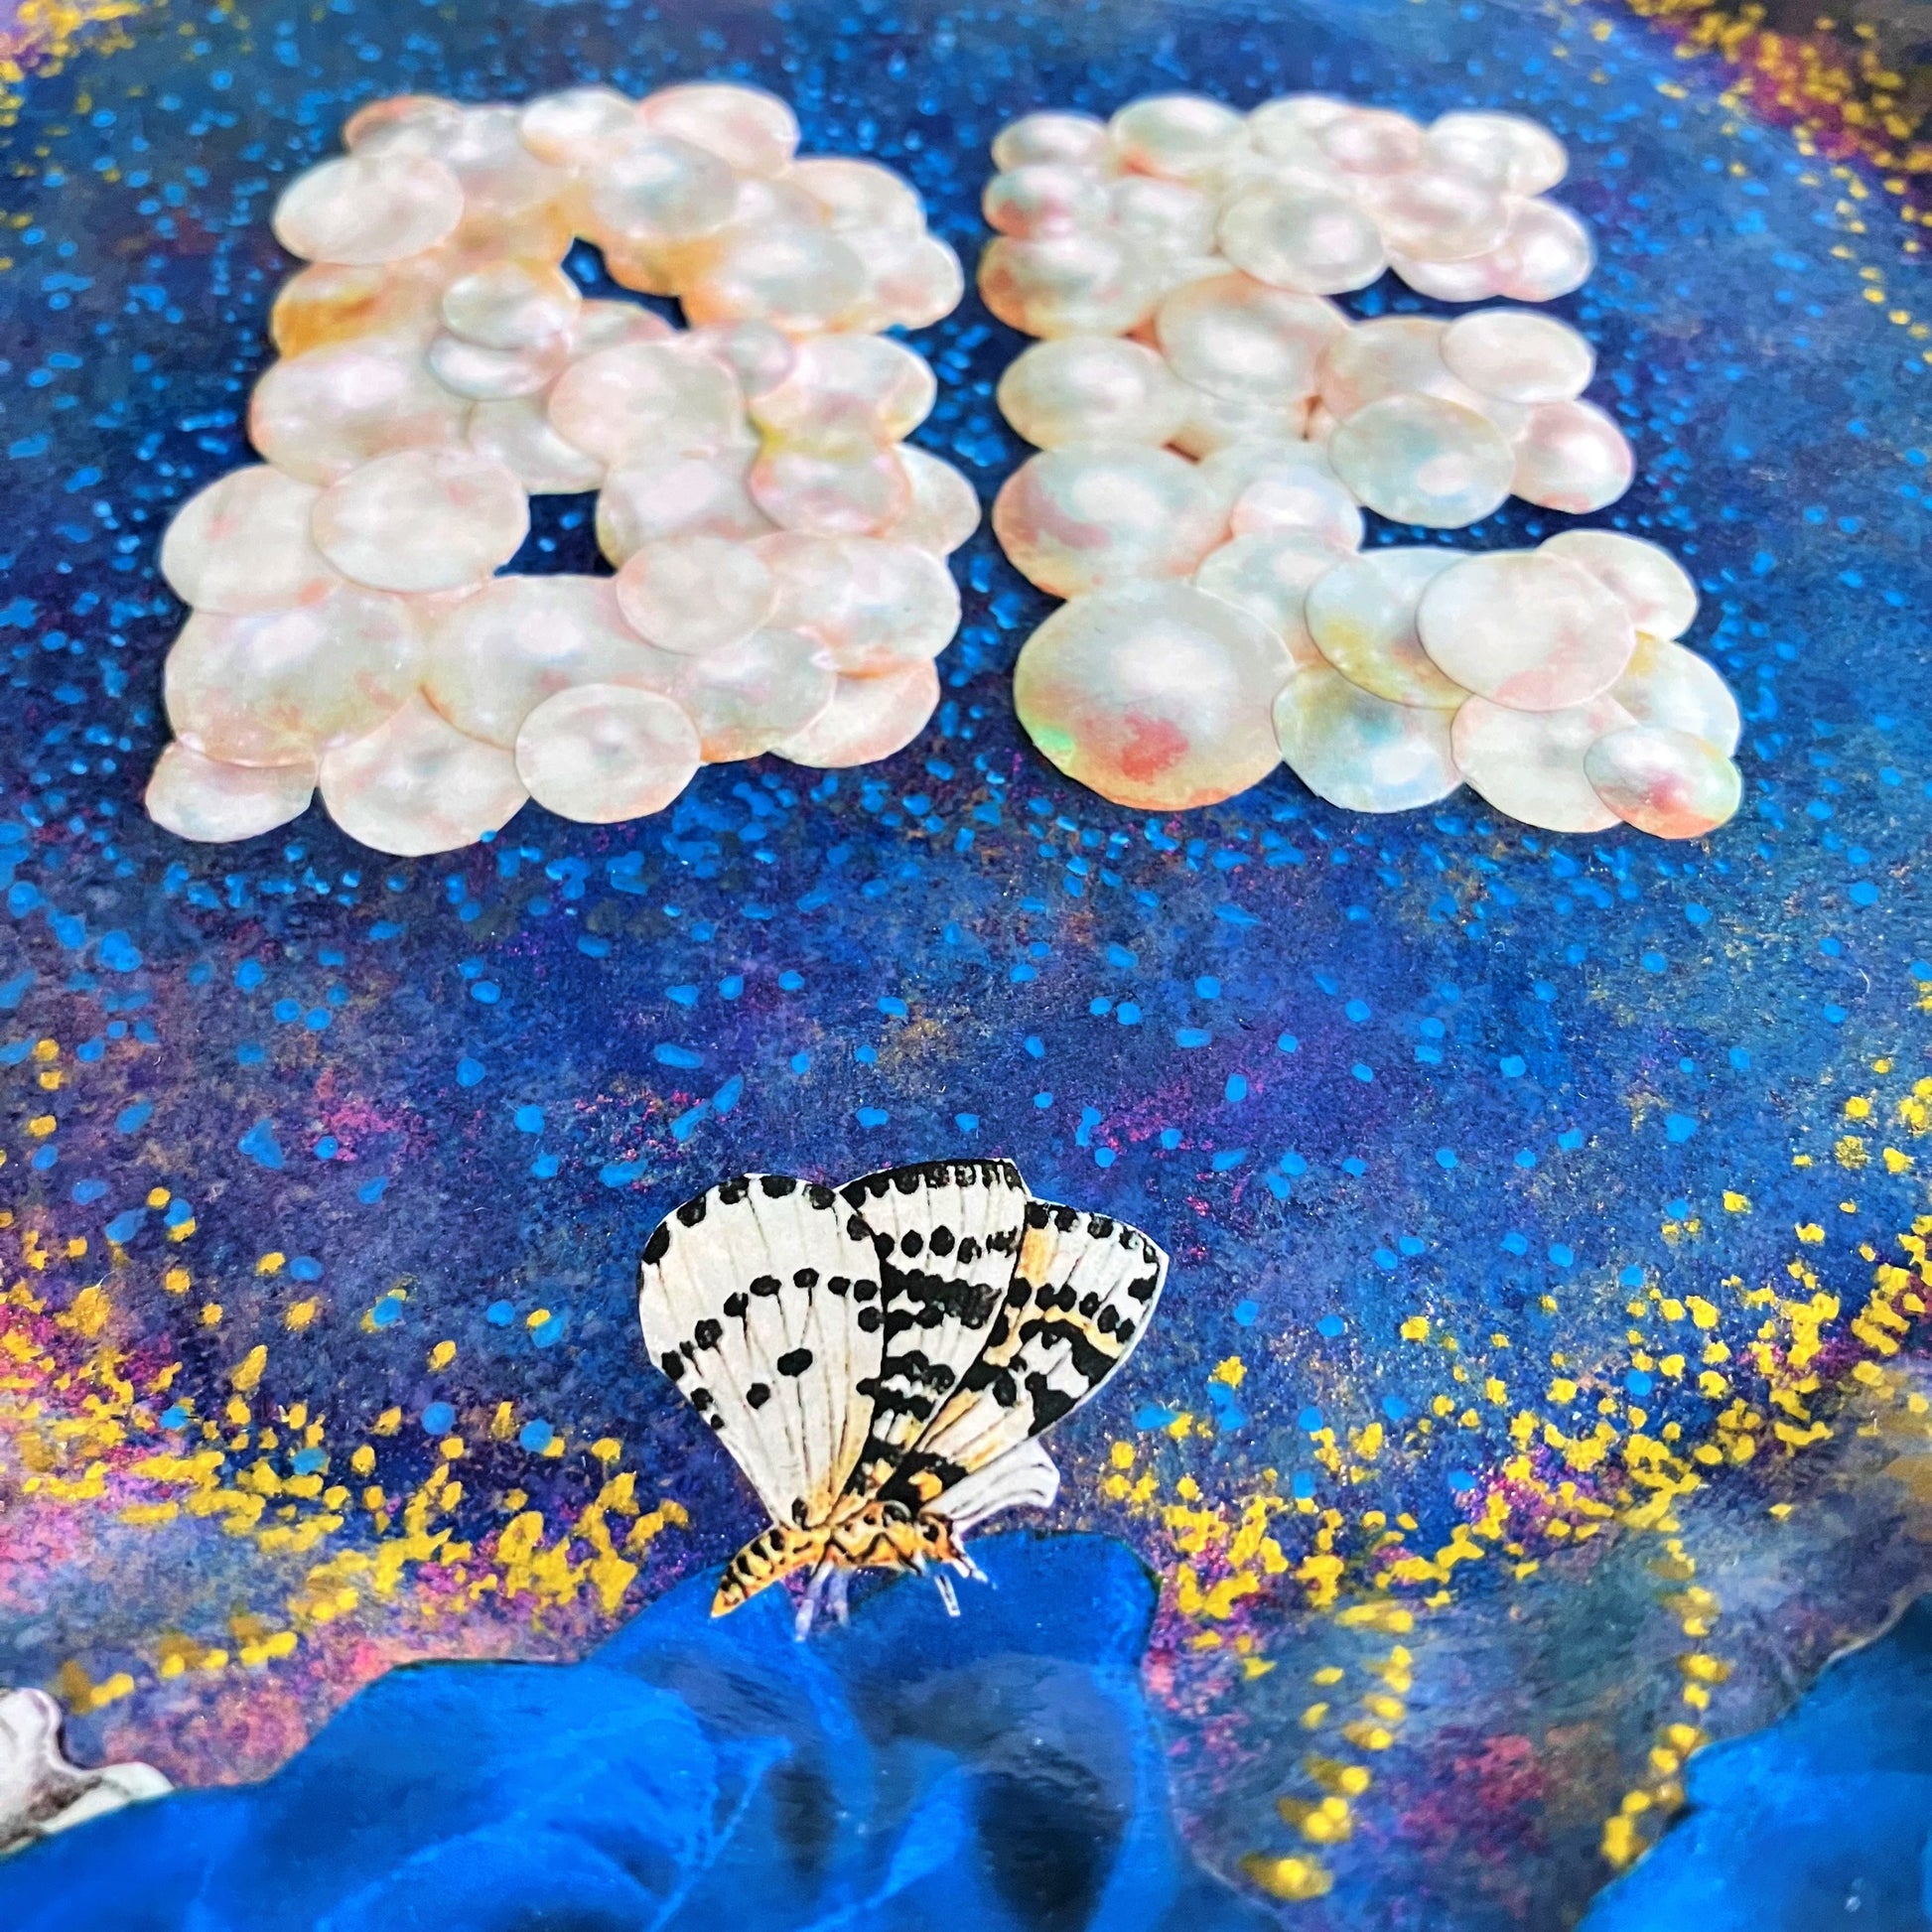 "Be" Wall Plate by House of Frisson. Featuring a collage of the word "Be" written with pearls, framed by blue roses, pearls, shells, and moths, on a blue background with golden details. Closeup detail showing the blue roses and moths.